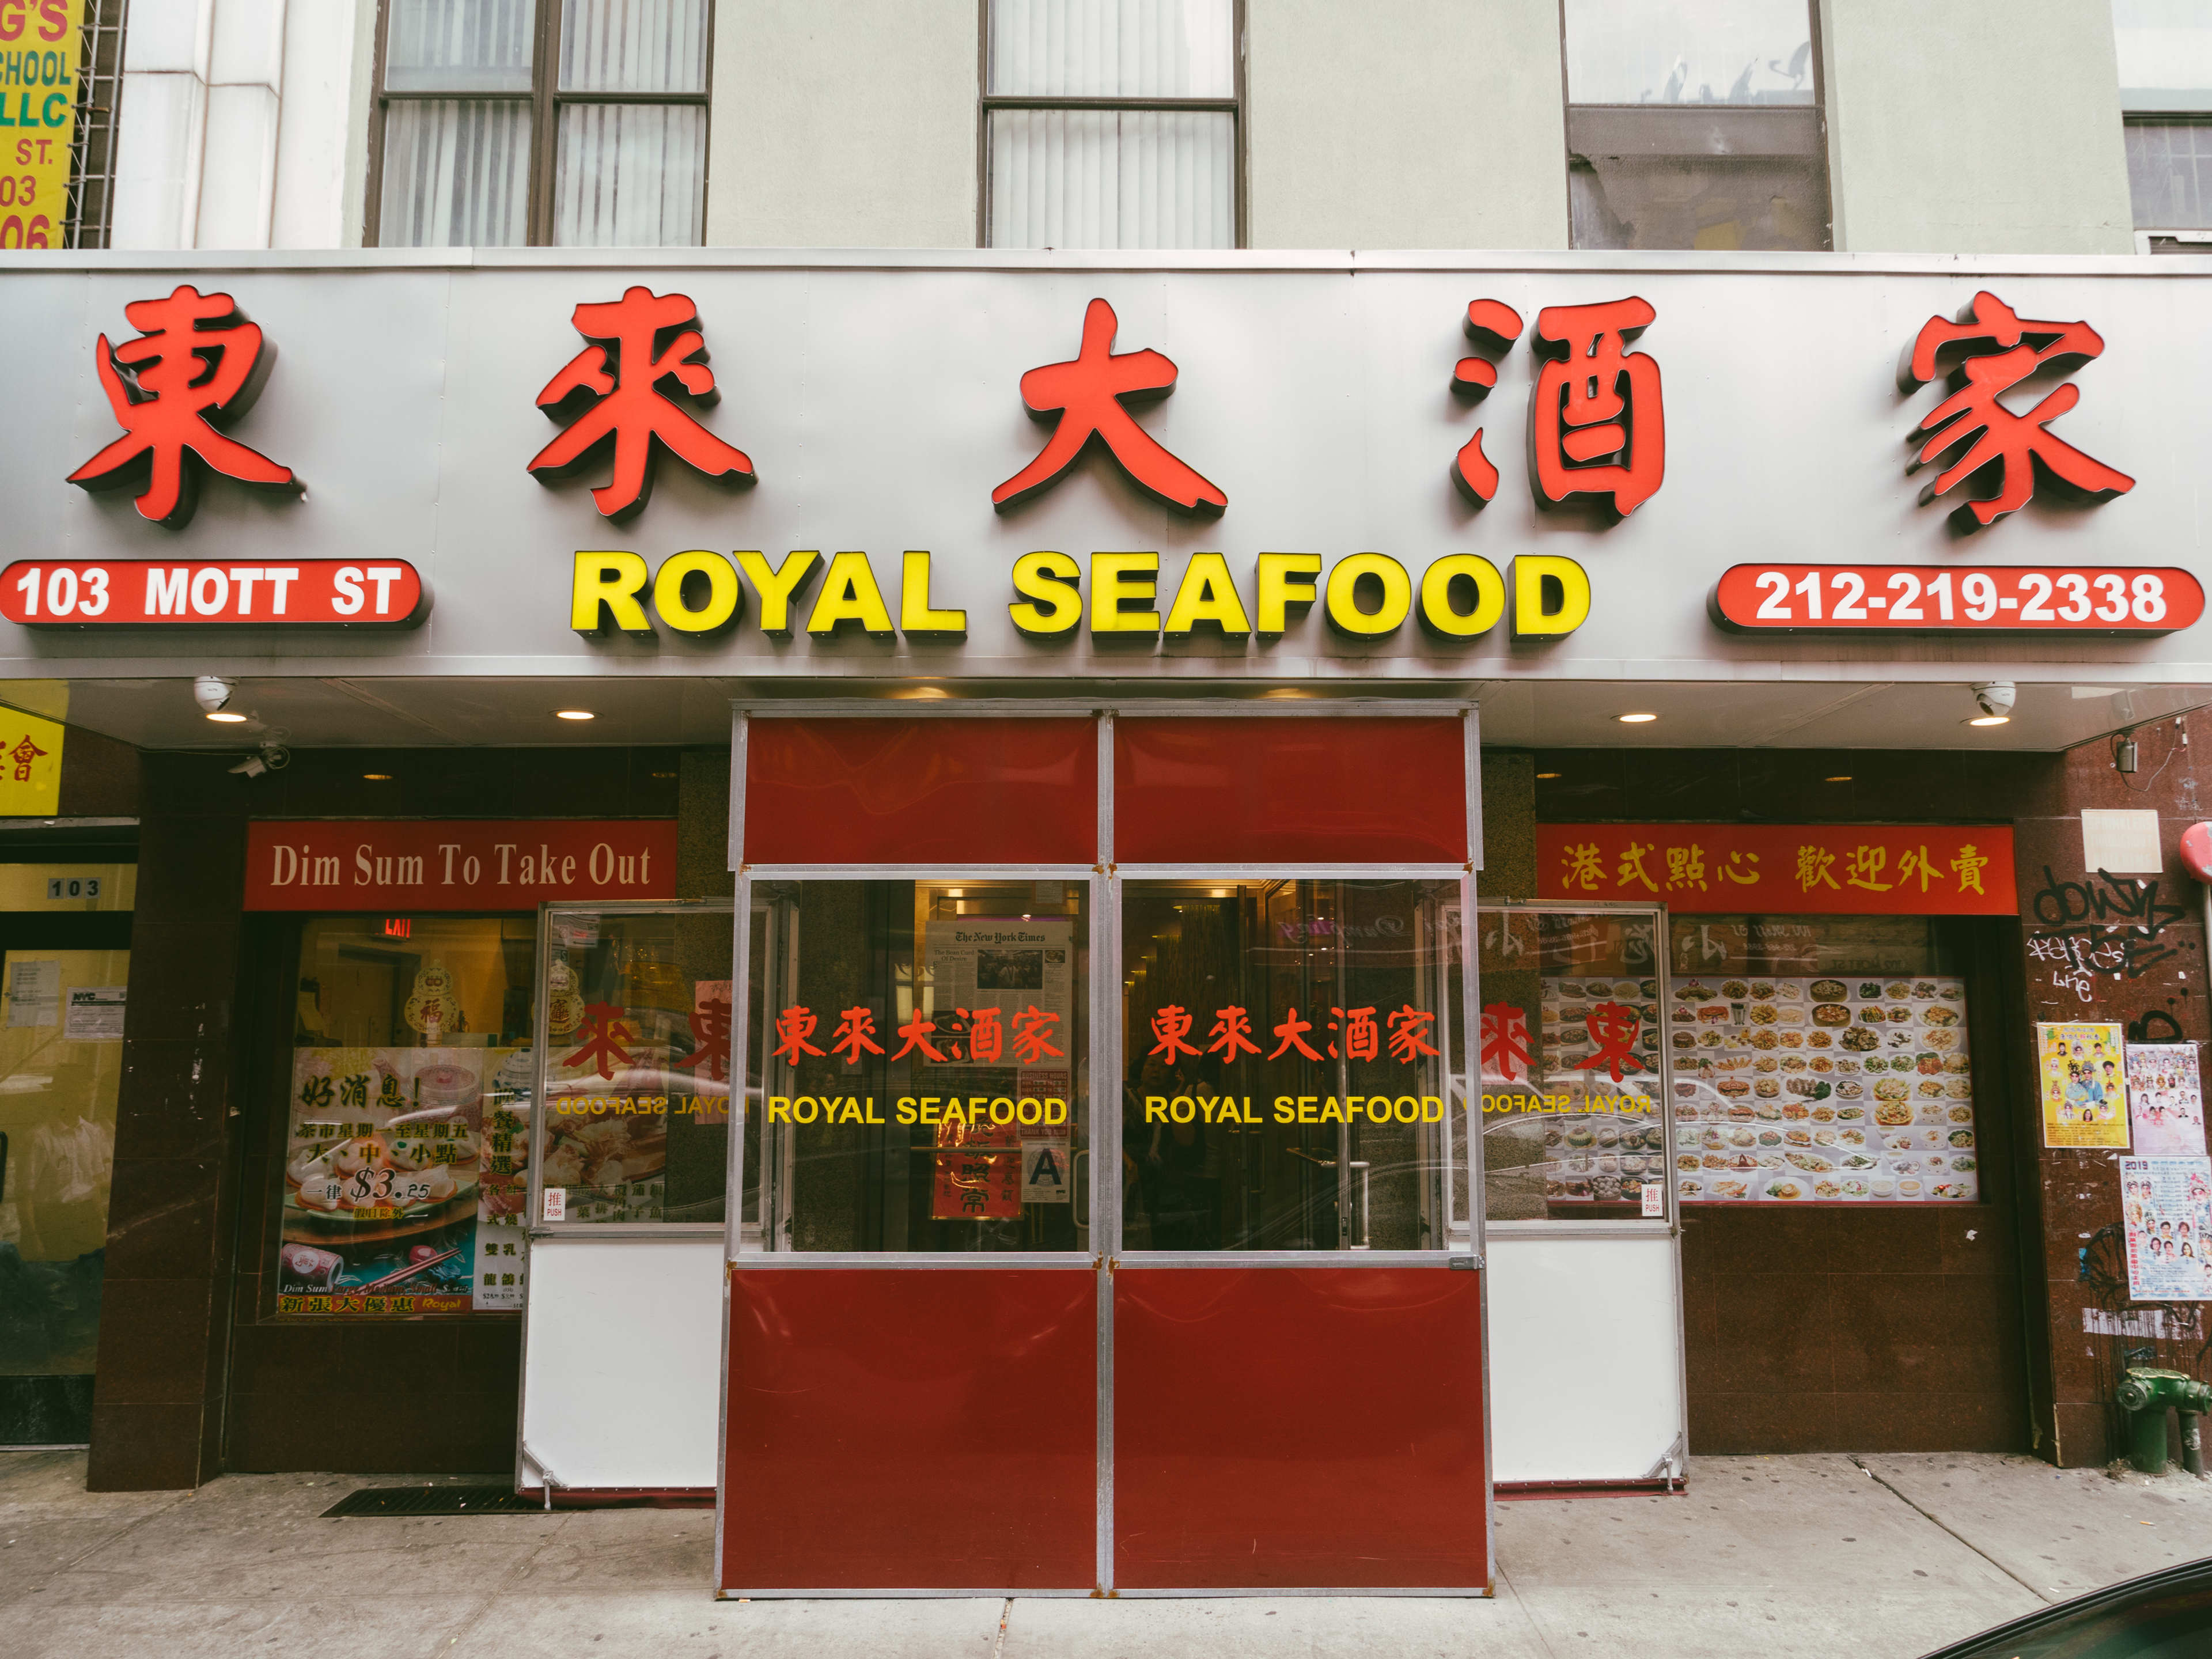 The exterior of Royal Seafood.